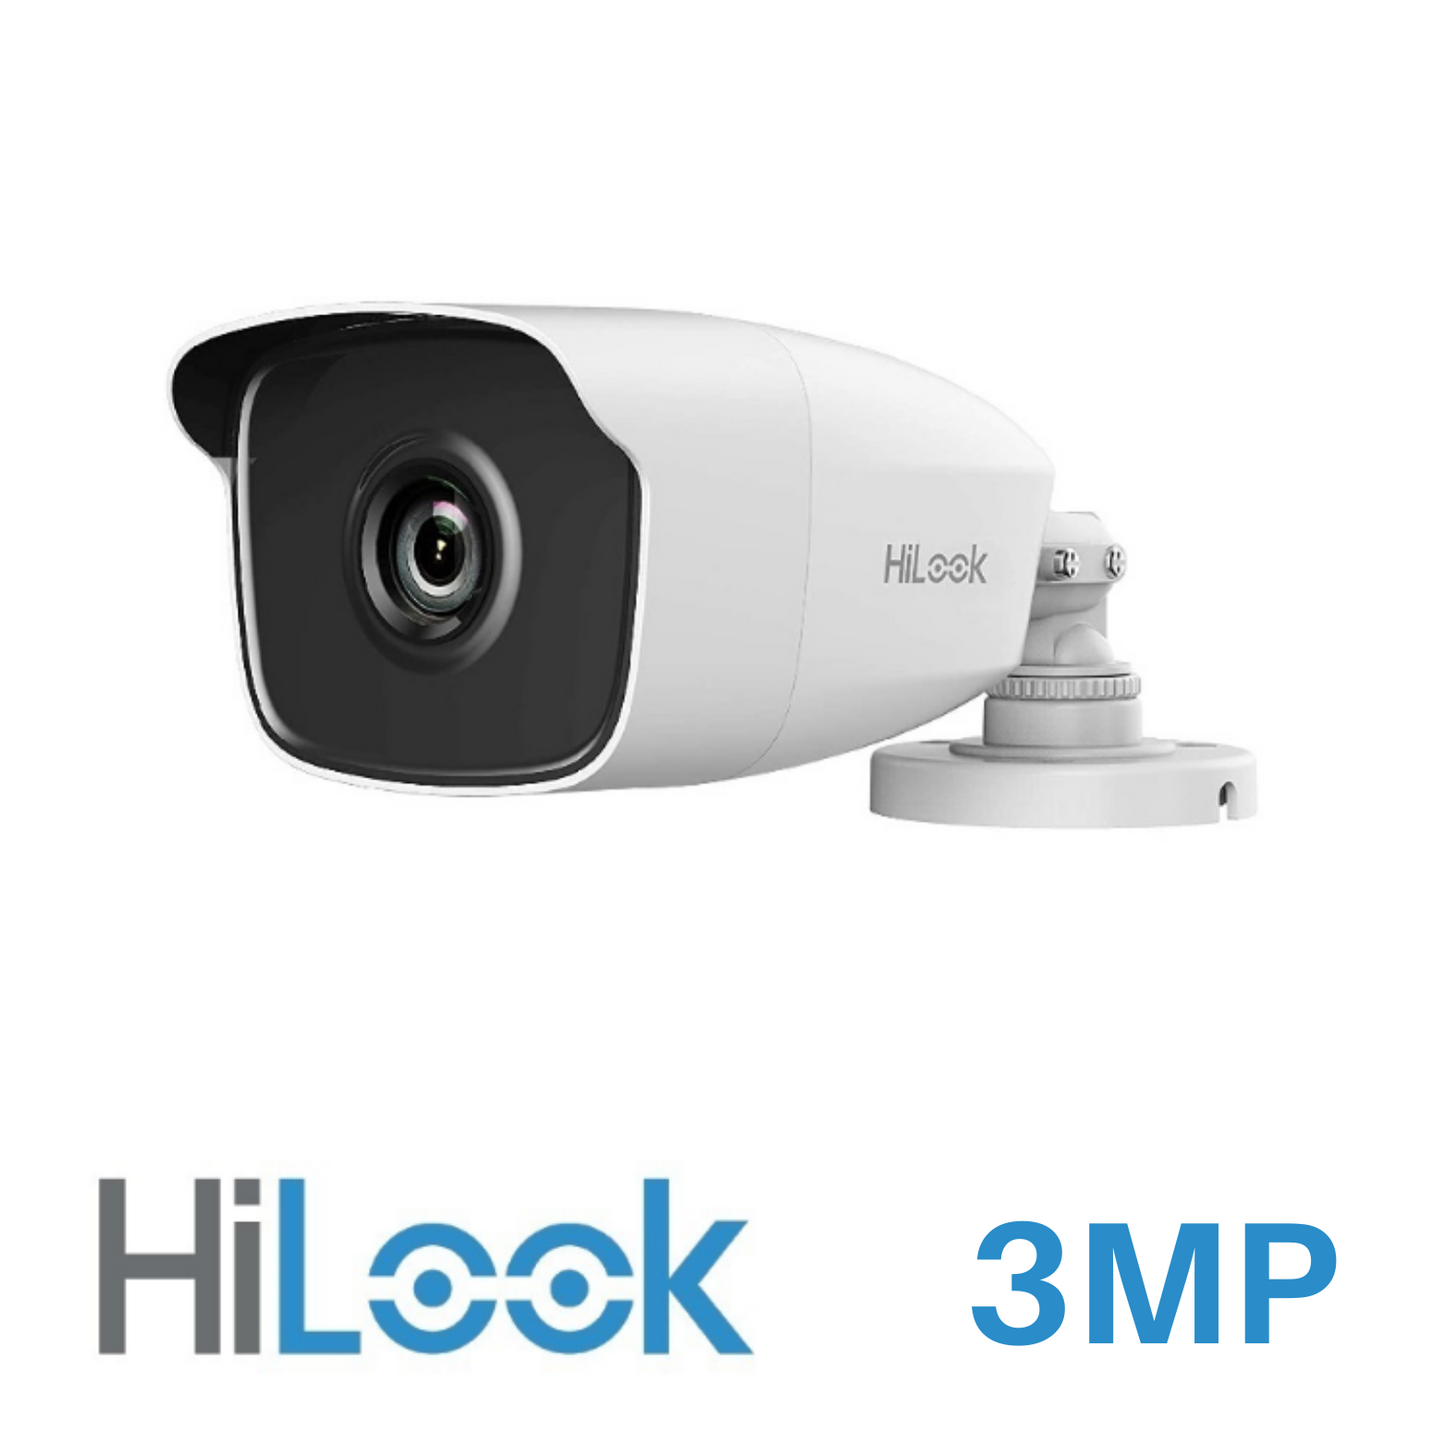 3MP 2.8MM Hilook Hikvision Fixed lens analogue camera THC-B230(2.8MM)